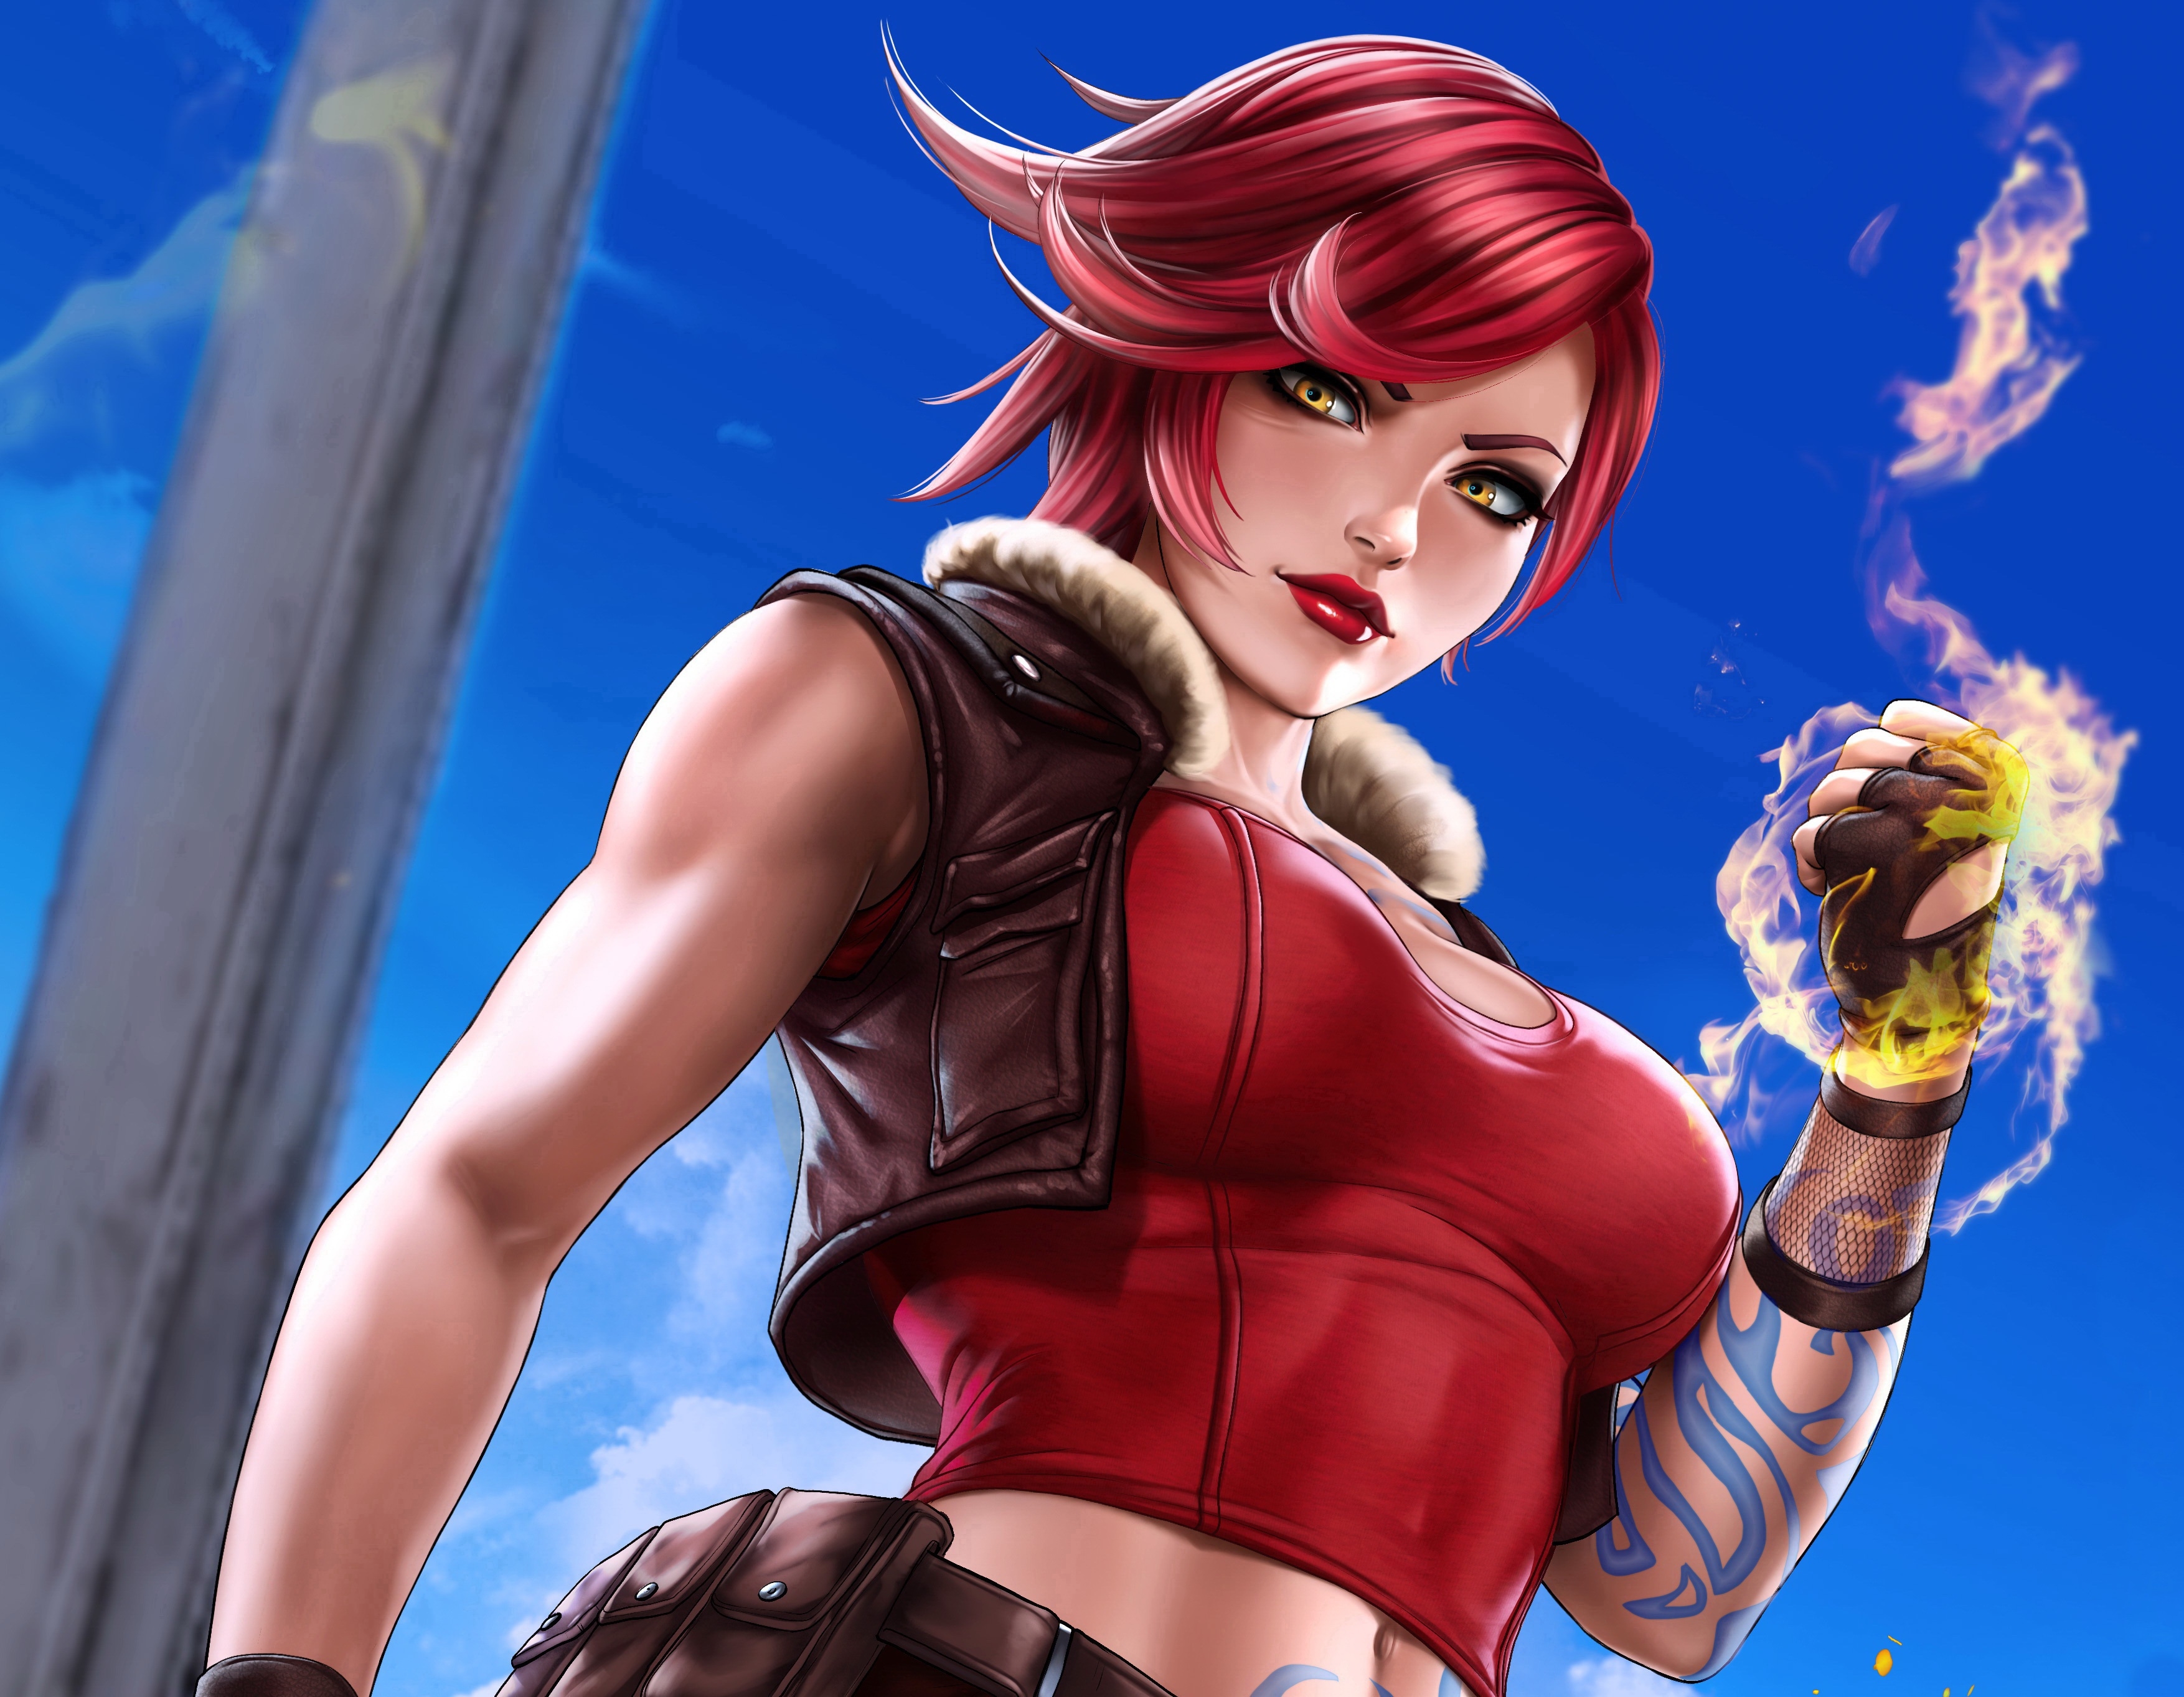 Lilith Borderlands Wallpaper Hd Games 4k Wallpapers Images Photos And Background